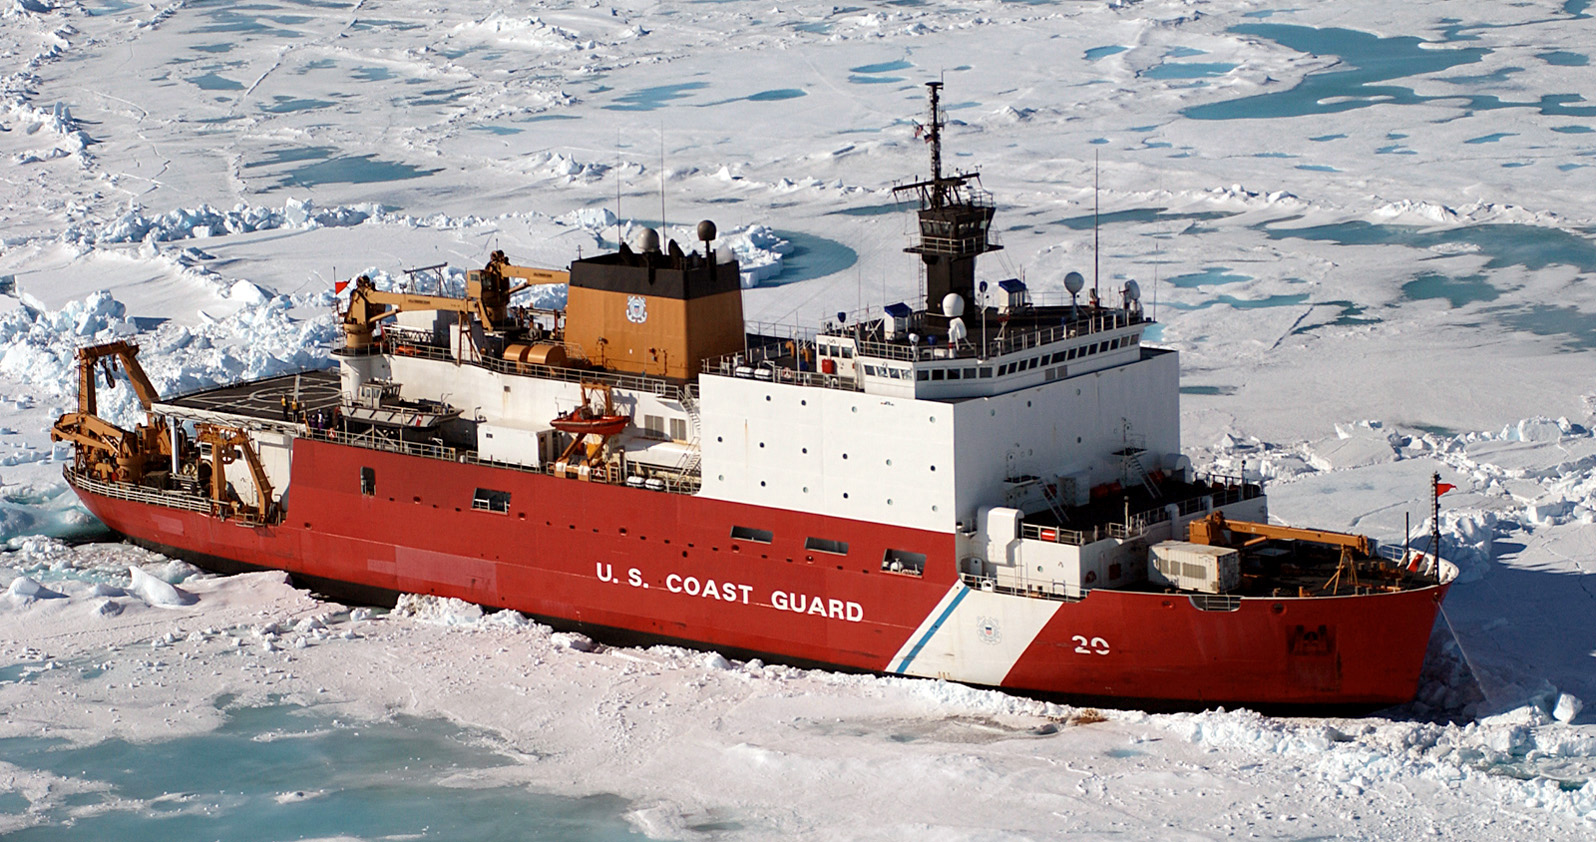 The U.S. Coast Guard Healy Class Icebreaker HEALY (WAGB 20) sits in the ice, about 100 miles north of Barrow, Alaska, in order to allow scientists onboard to take core samples from the floor of the Arctic Ocean on June 18, 2005. (U.S. Coast Guard photo by Public Affairs Specialist 2nd Class NyxoLyno Cangemi) (Released)